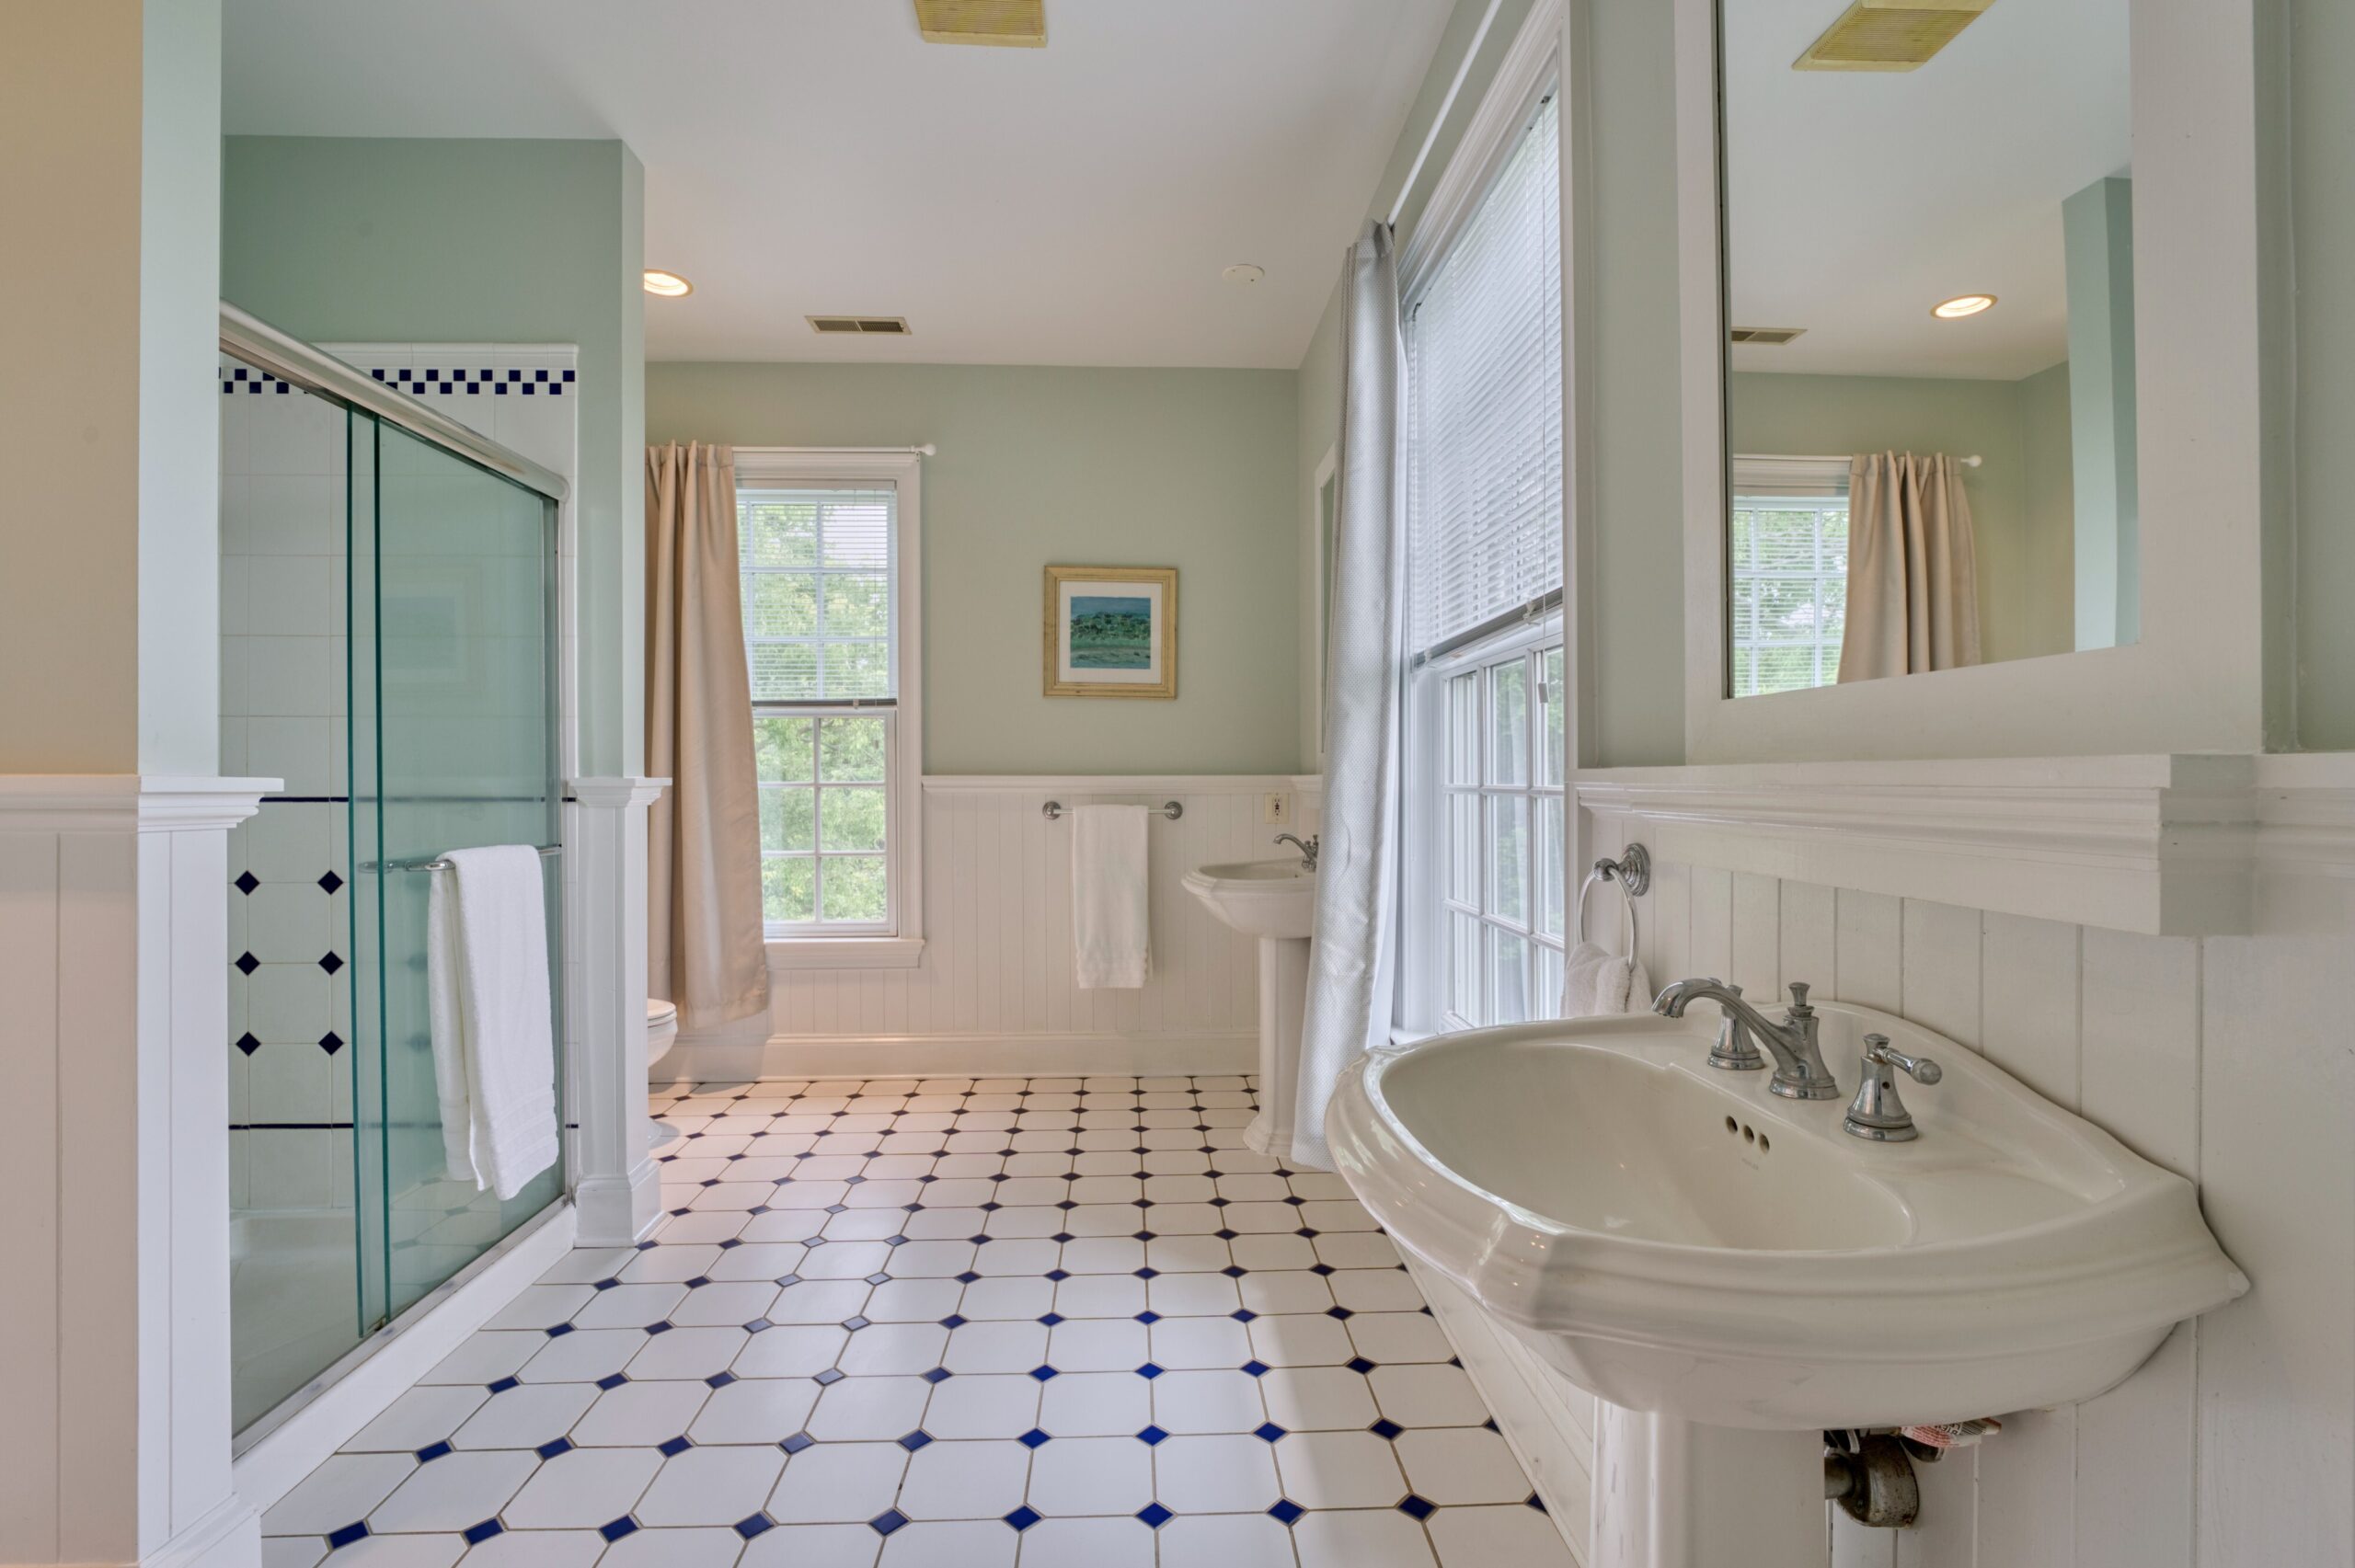 Professional interior photo of 15203 Clover Hill Road - showing the primary bathroom with black and white tile floors